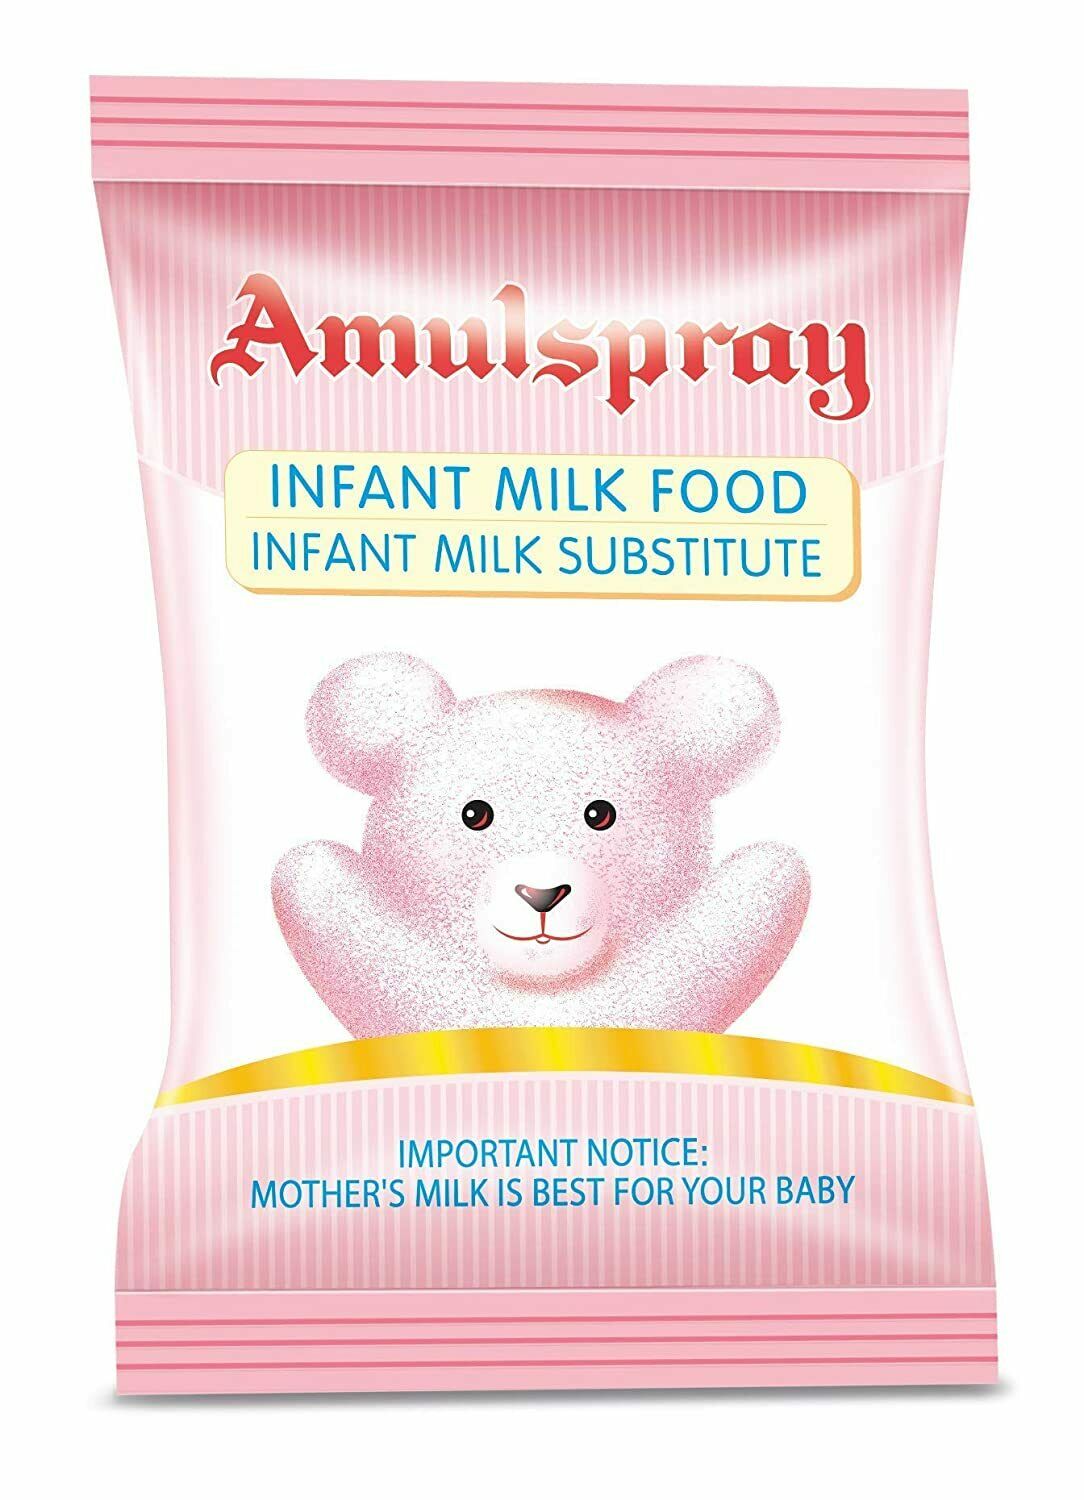 Amul Baby Food Products